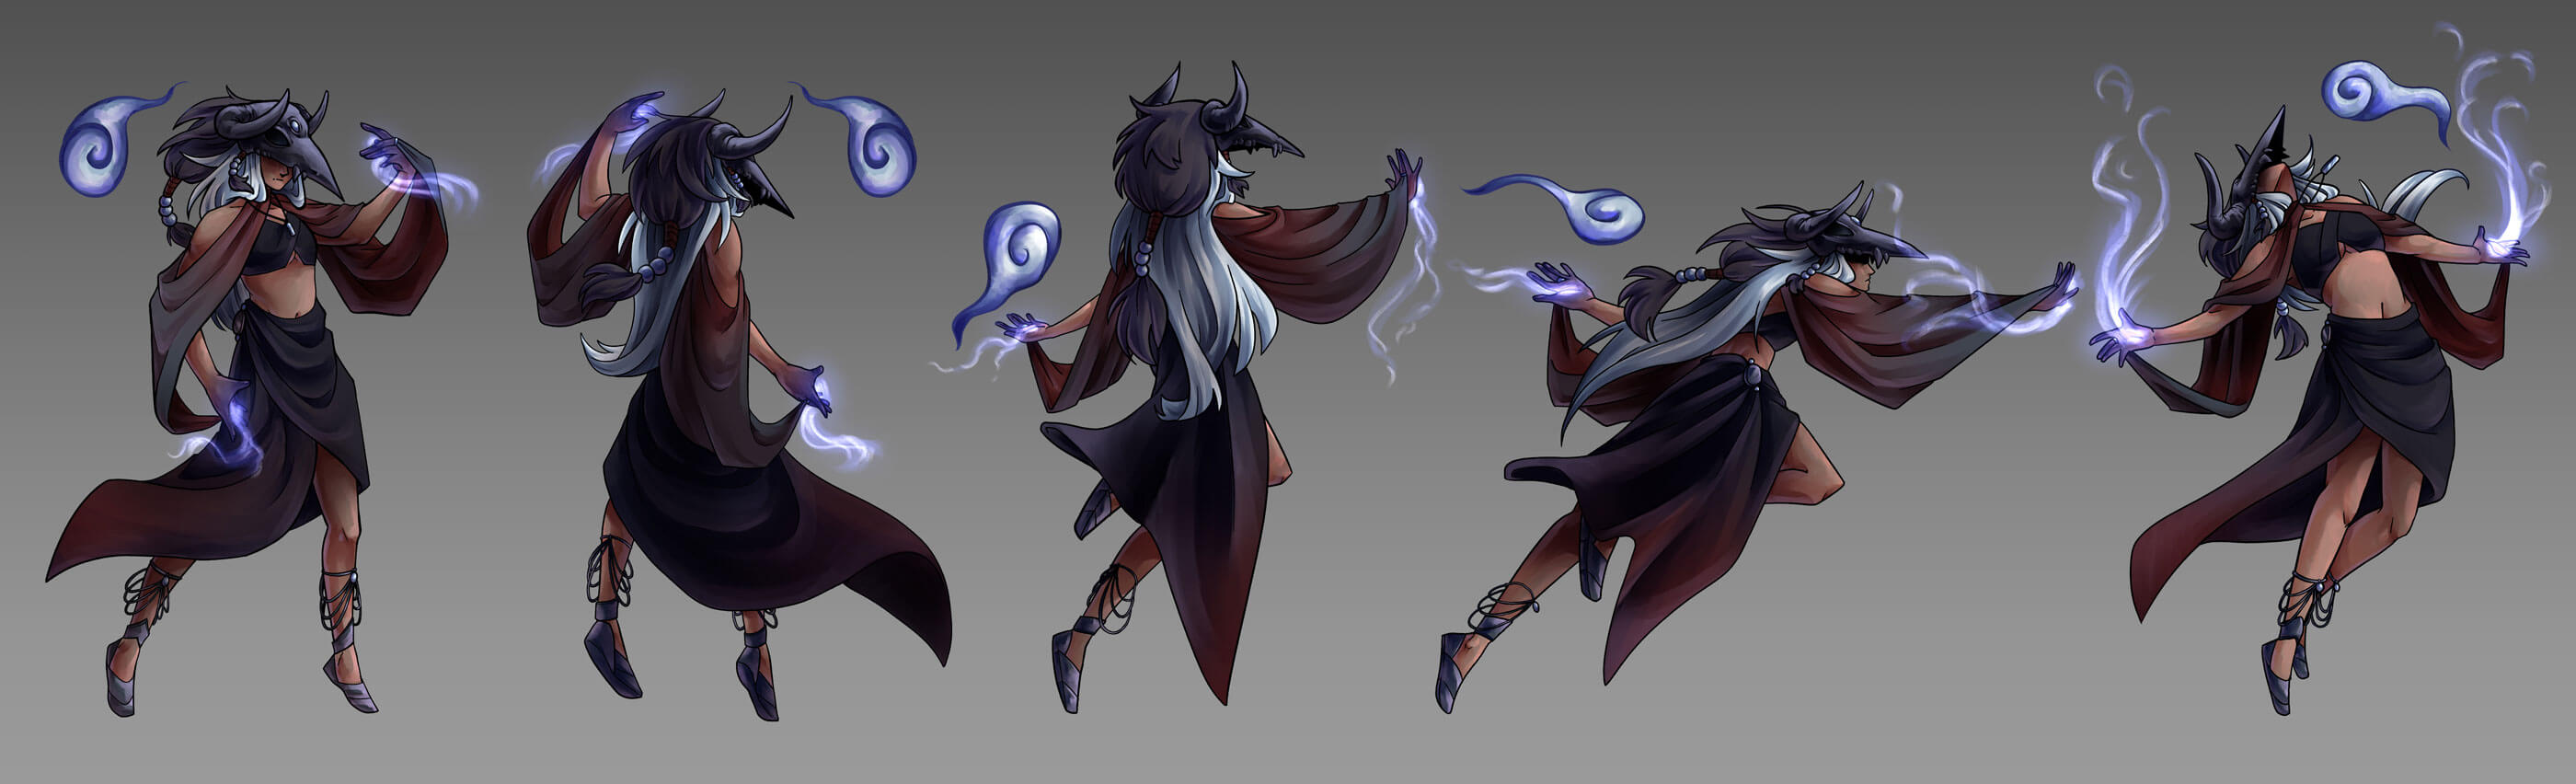 Character sheet of a woman with magical powers wearing a crow hat.